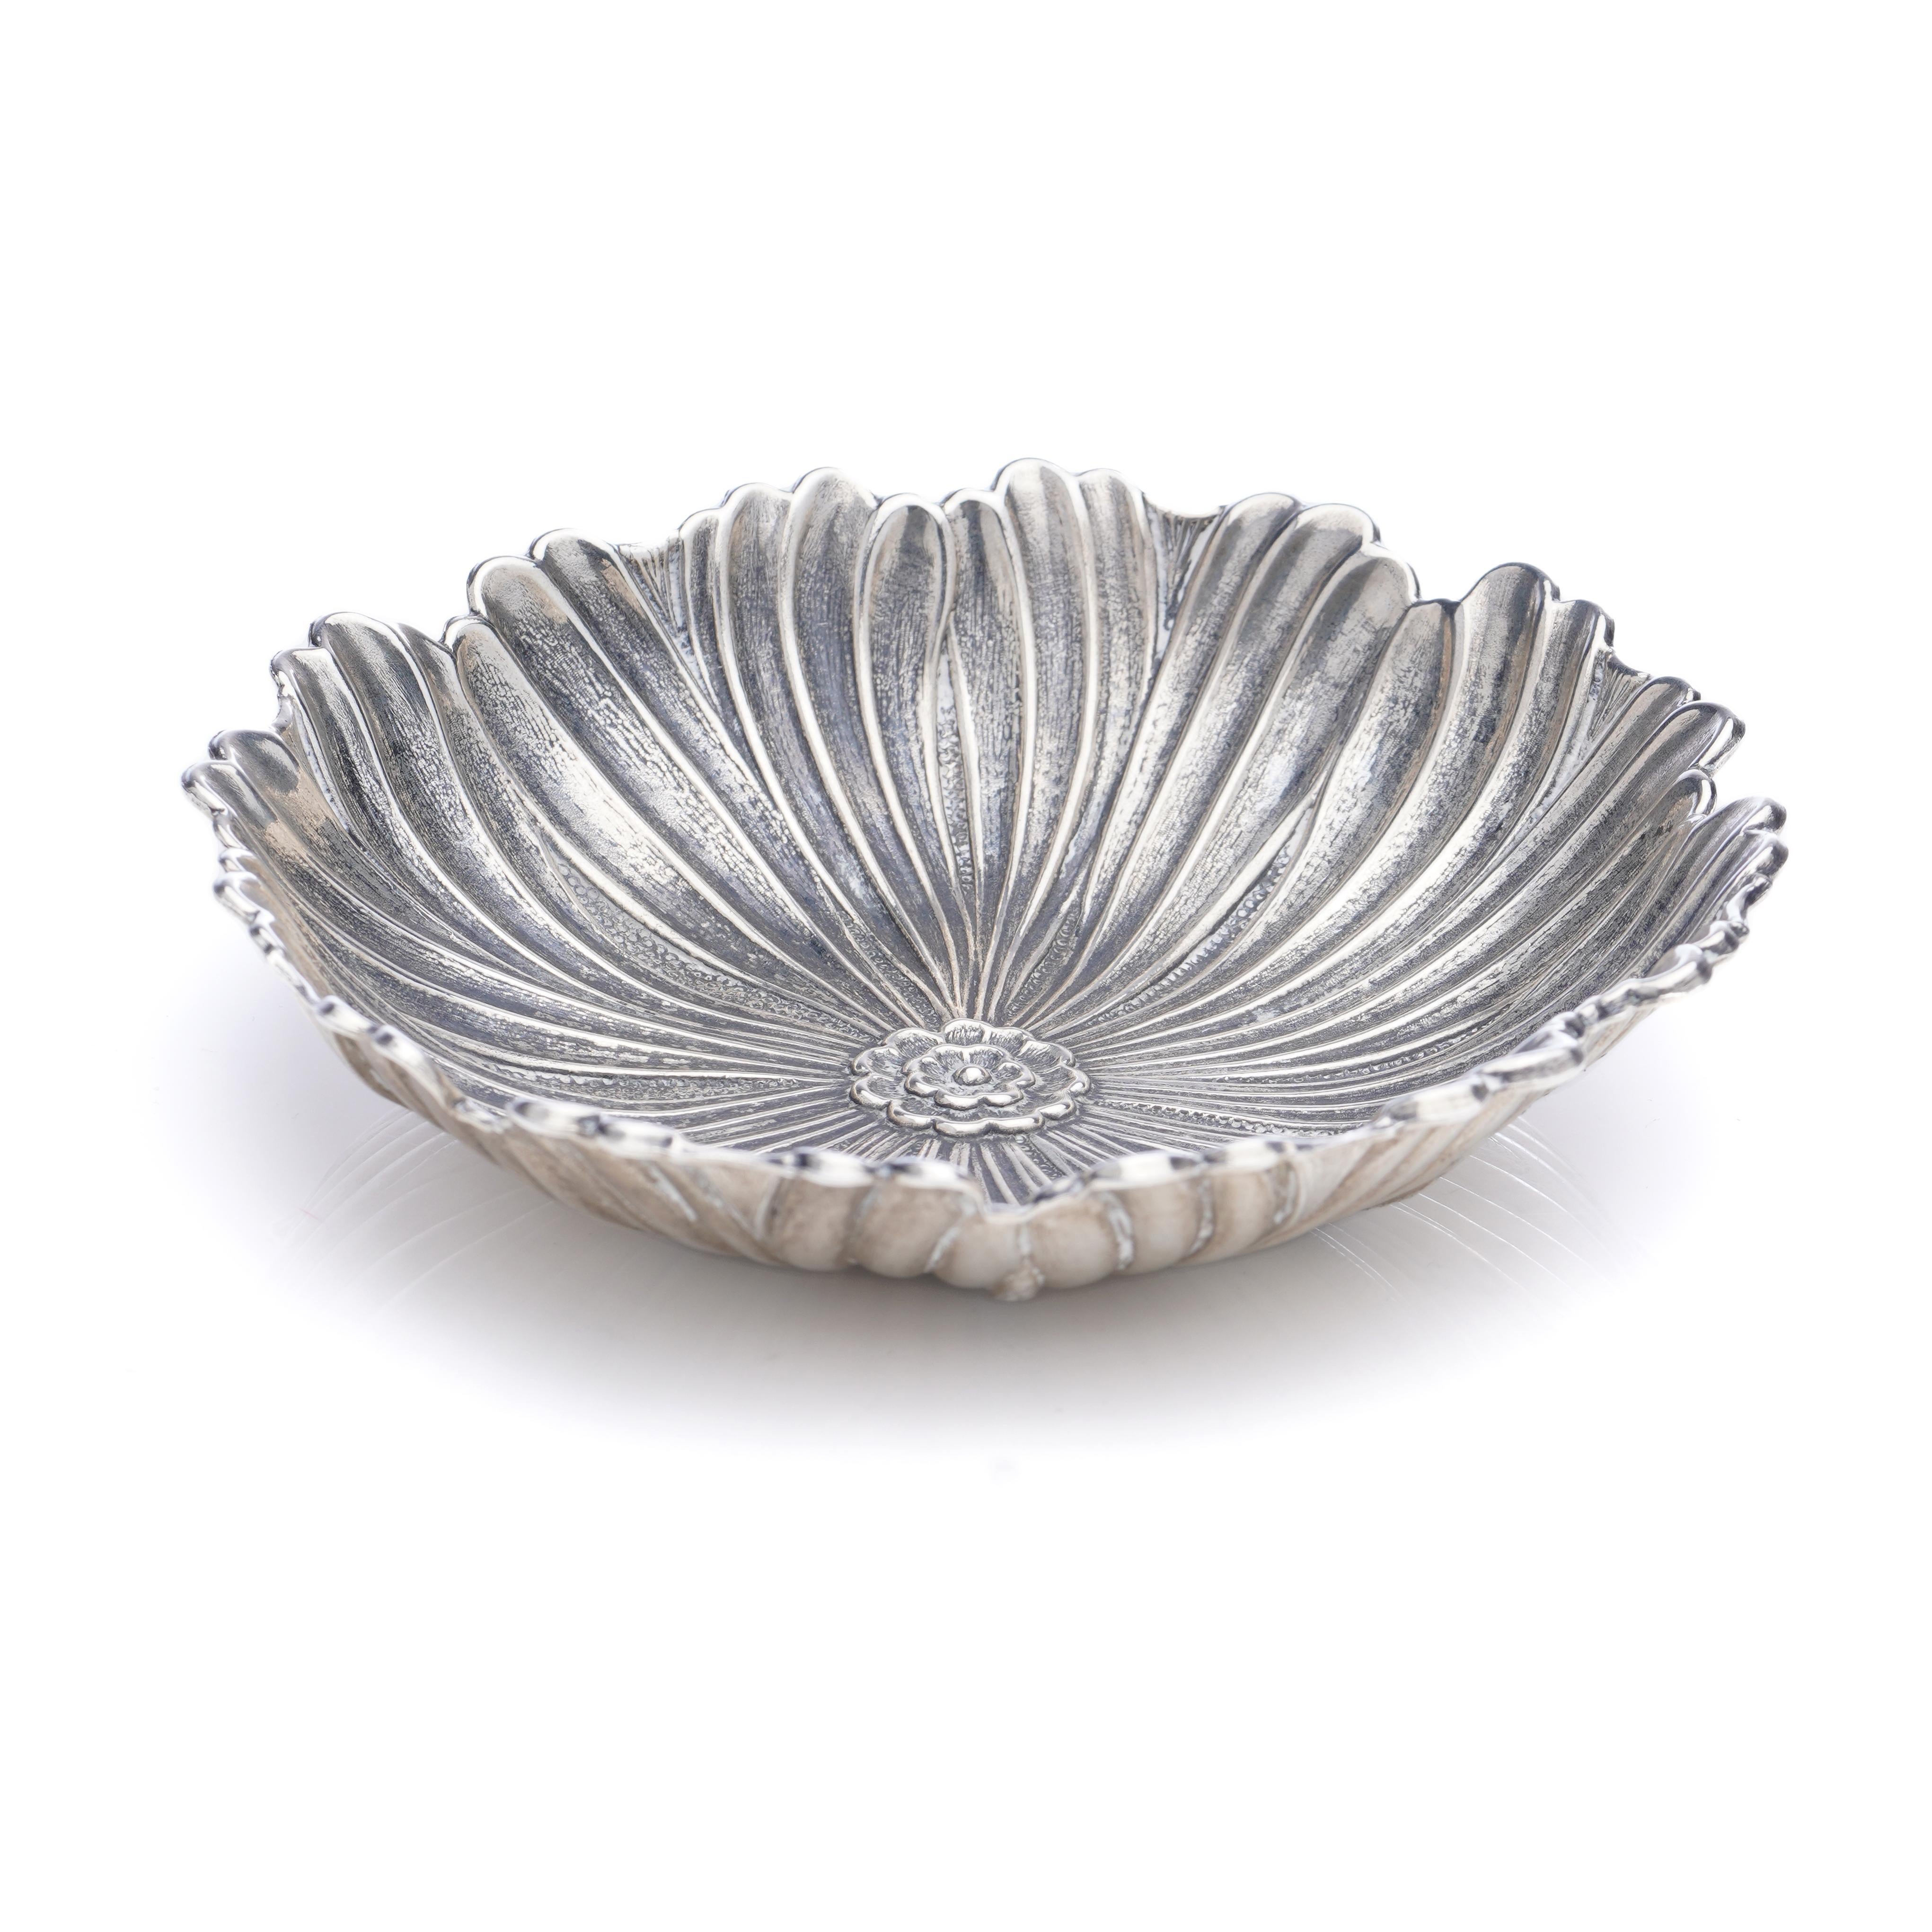 Gianmaria Buccellati silver lotus flower dish. 
Made in Italy Circa 1970's
Maker: Gianmaria Buccellati
Fully hallmarked. 

Dimensions - 
Size : diameter x height: 12.5 x 2.5 cm 
Total Weight : 106 grams

Condition: Pre-owned, minor signs of